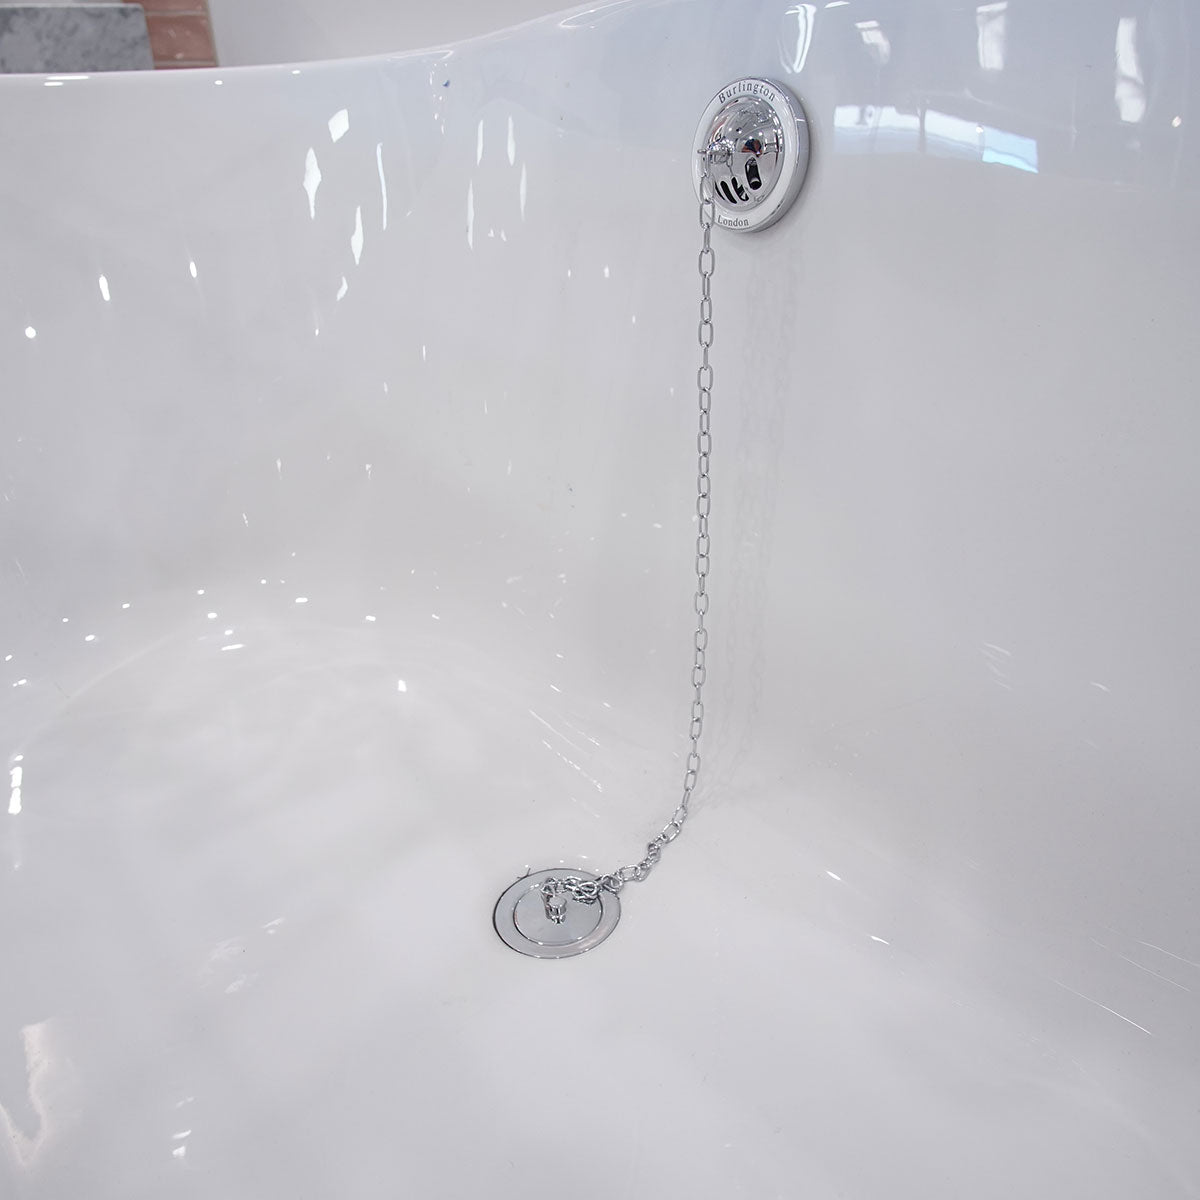 Burlington Exposed Bath Overflow with Plug and Chain Waste Deluxe Bathrooms UK